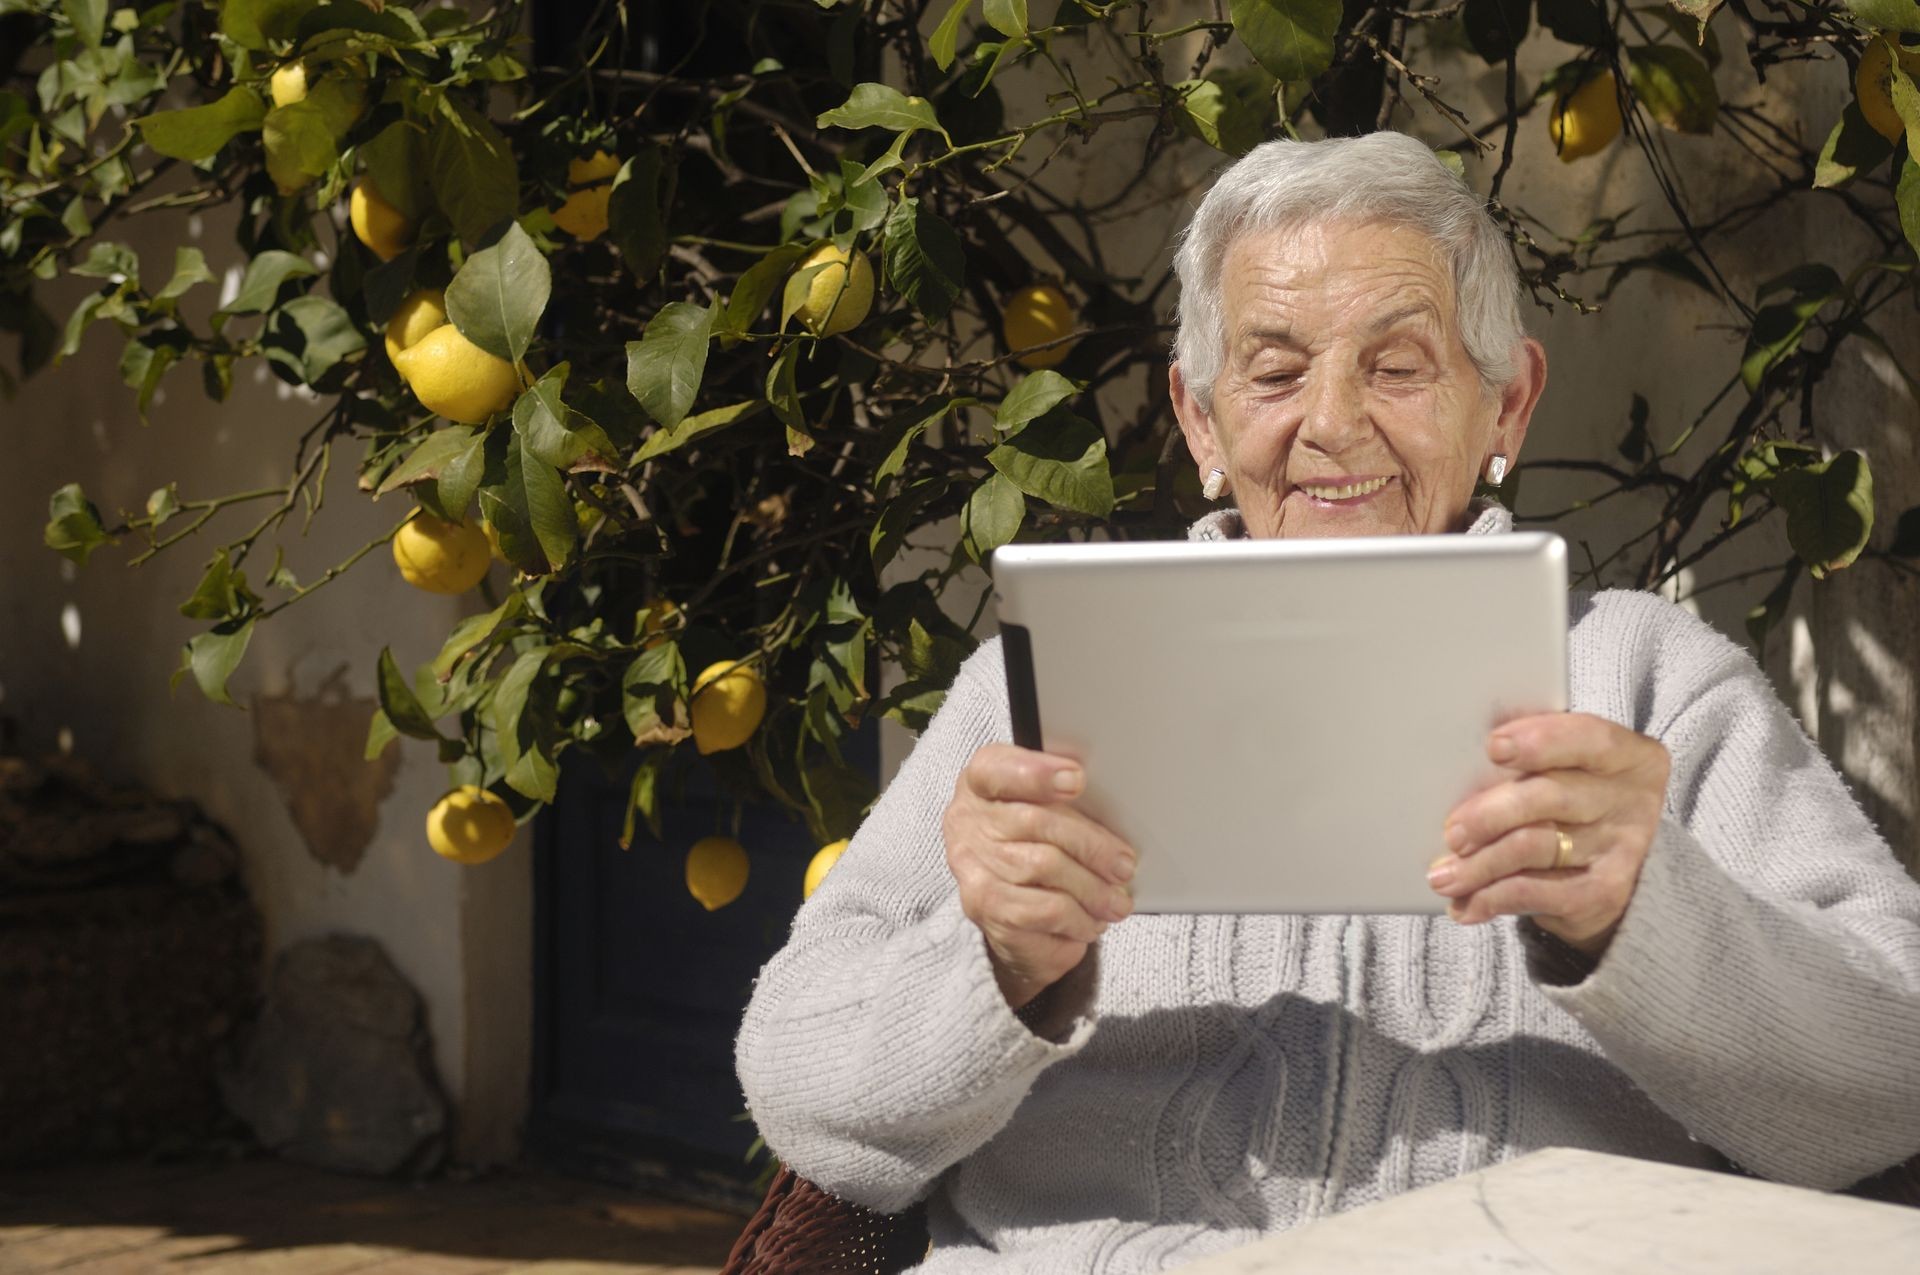  Smiling older woman sitting next to a lemon tree and reading on a tablet.